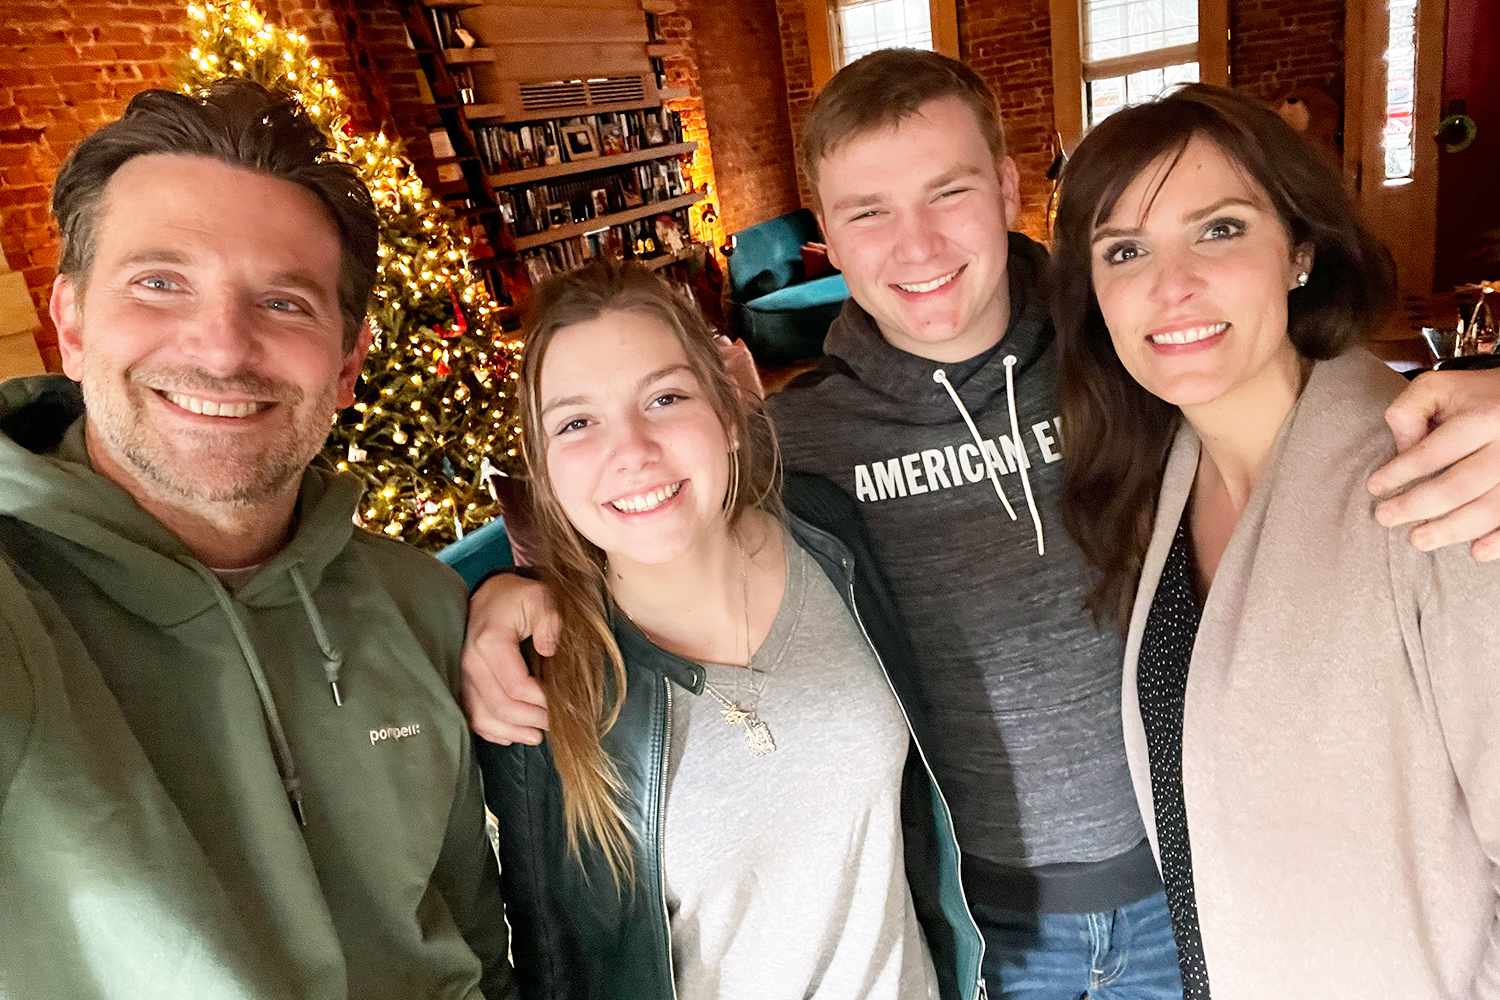 Taya Kyle and her children Colton and McKenna visit with Bradley Cooper and watch American Sniper for the first time. December 2023 in New York at Bradley's home.